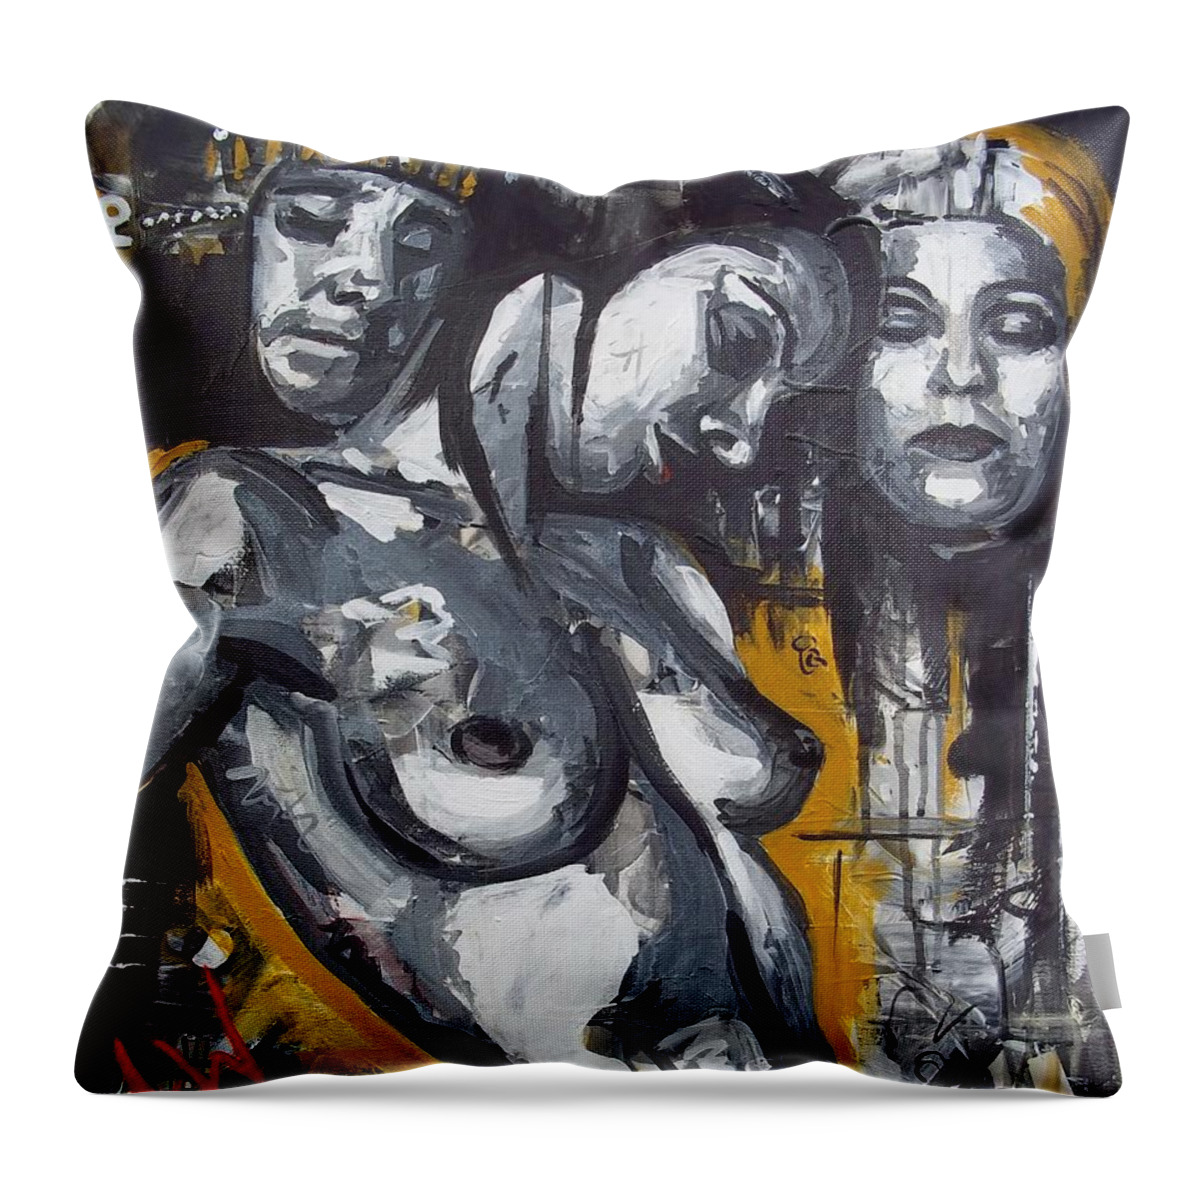 Art Throw Pillow featuring the painting Oscuro amor by Angie Wright